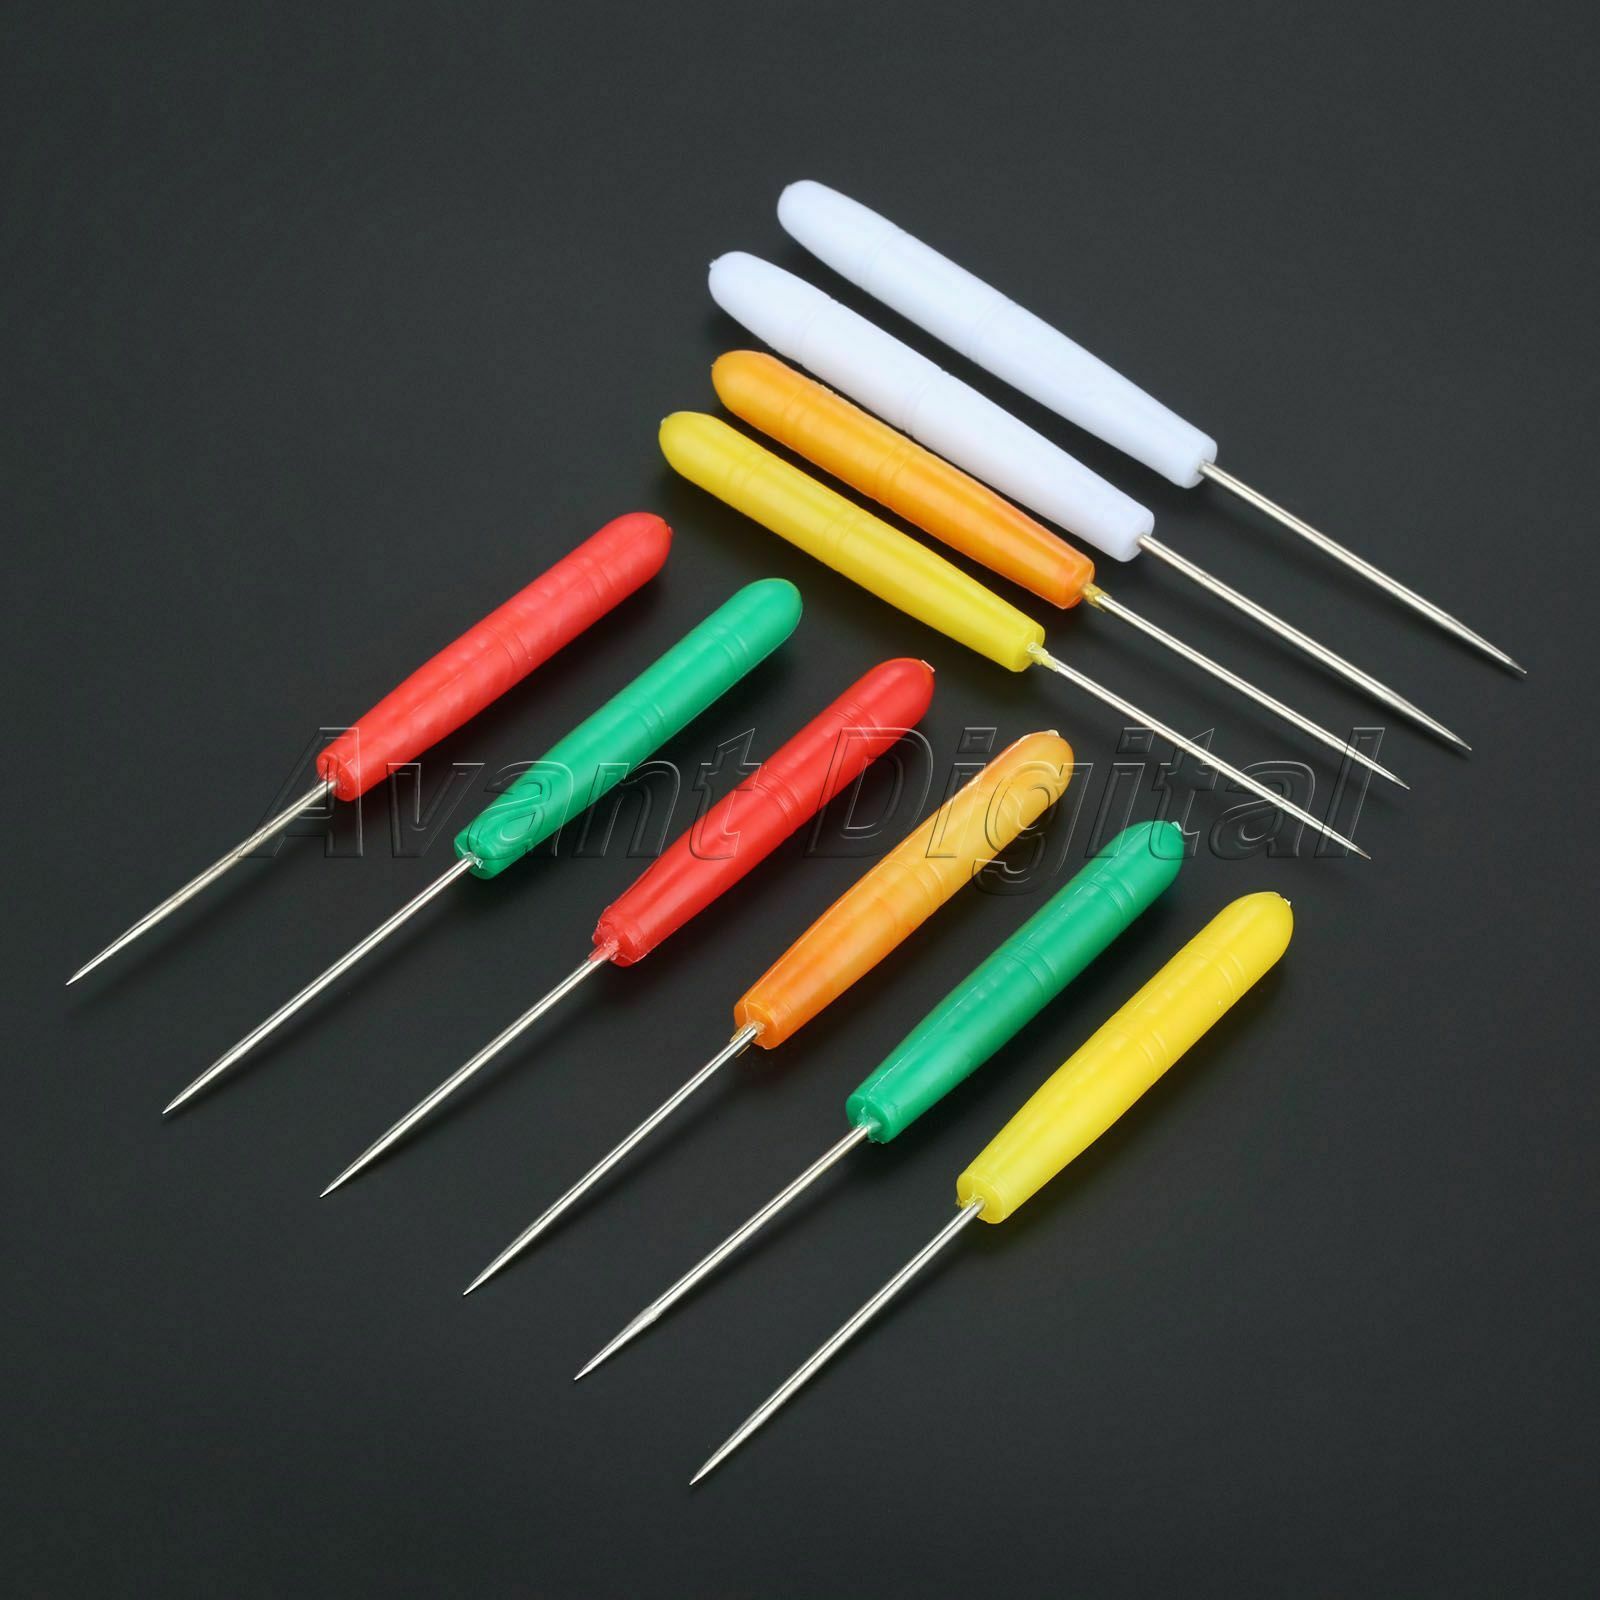 10pcs Sewing Awls Leather Punch Repair Stitching Clicker Tool Plastic Handle